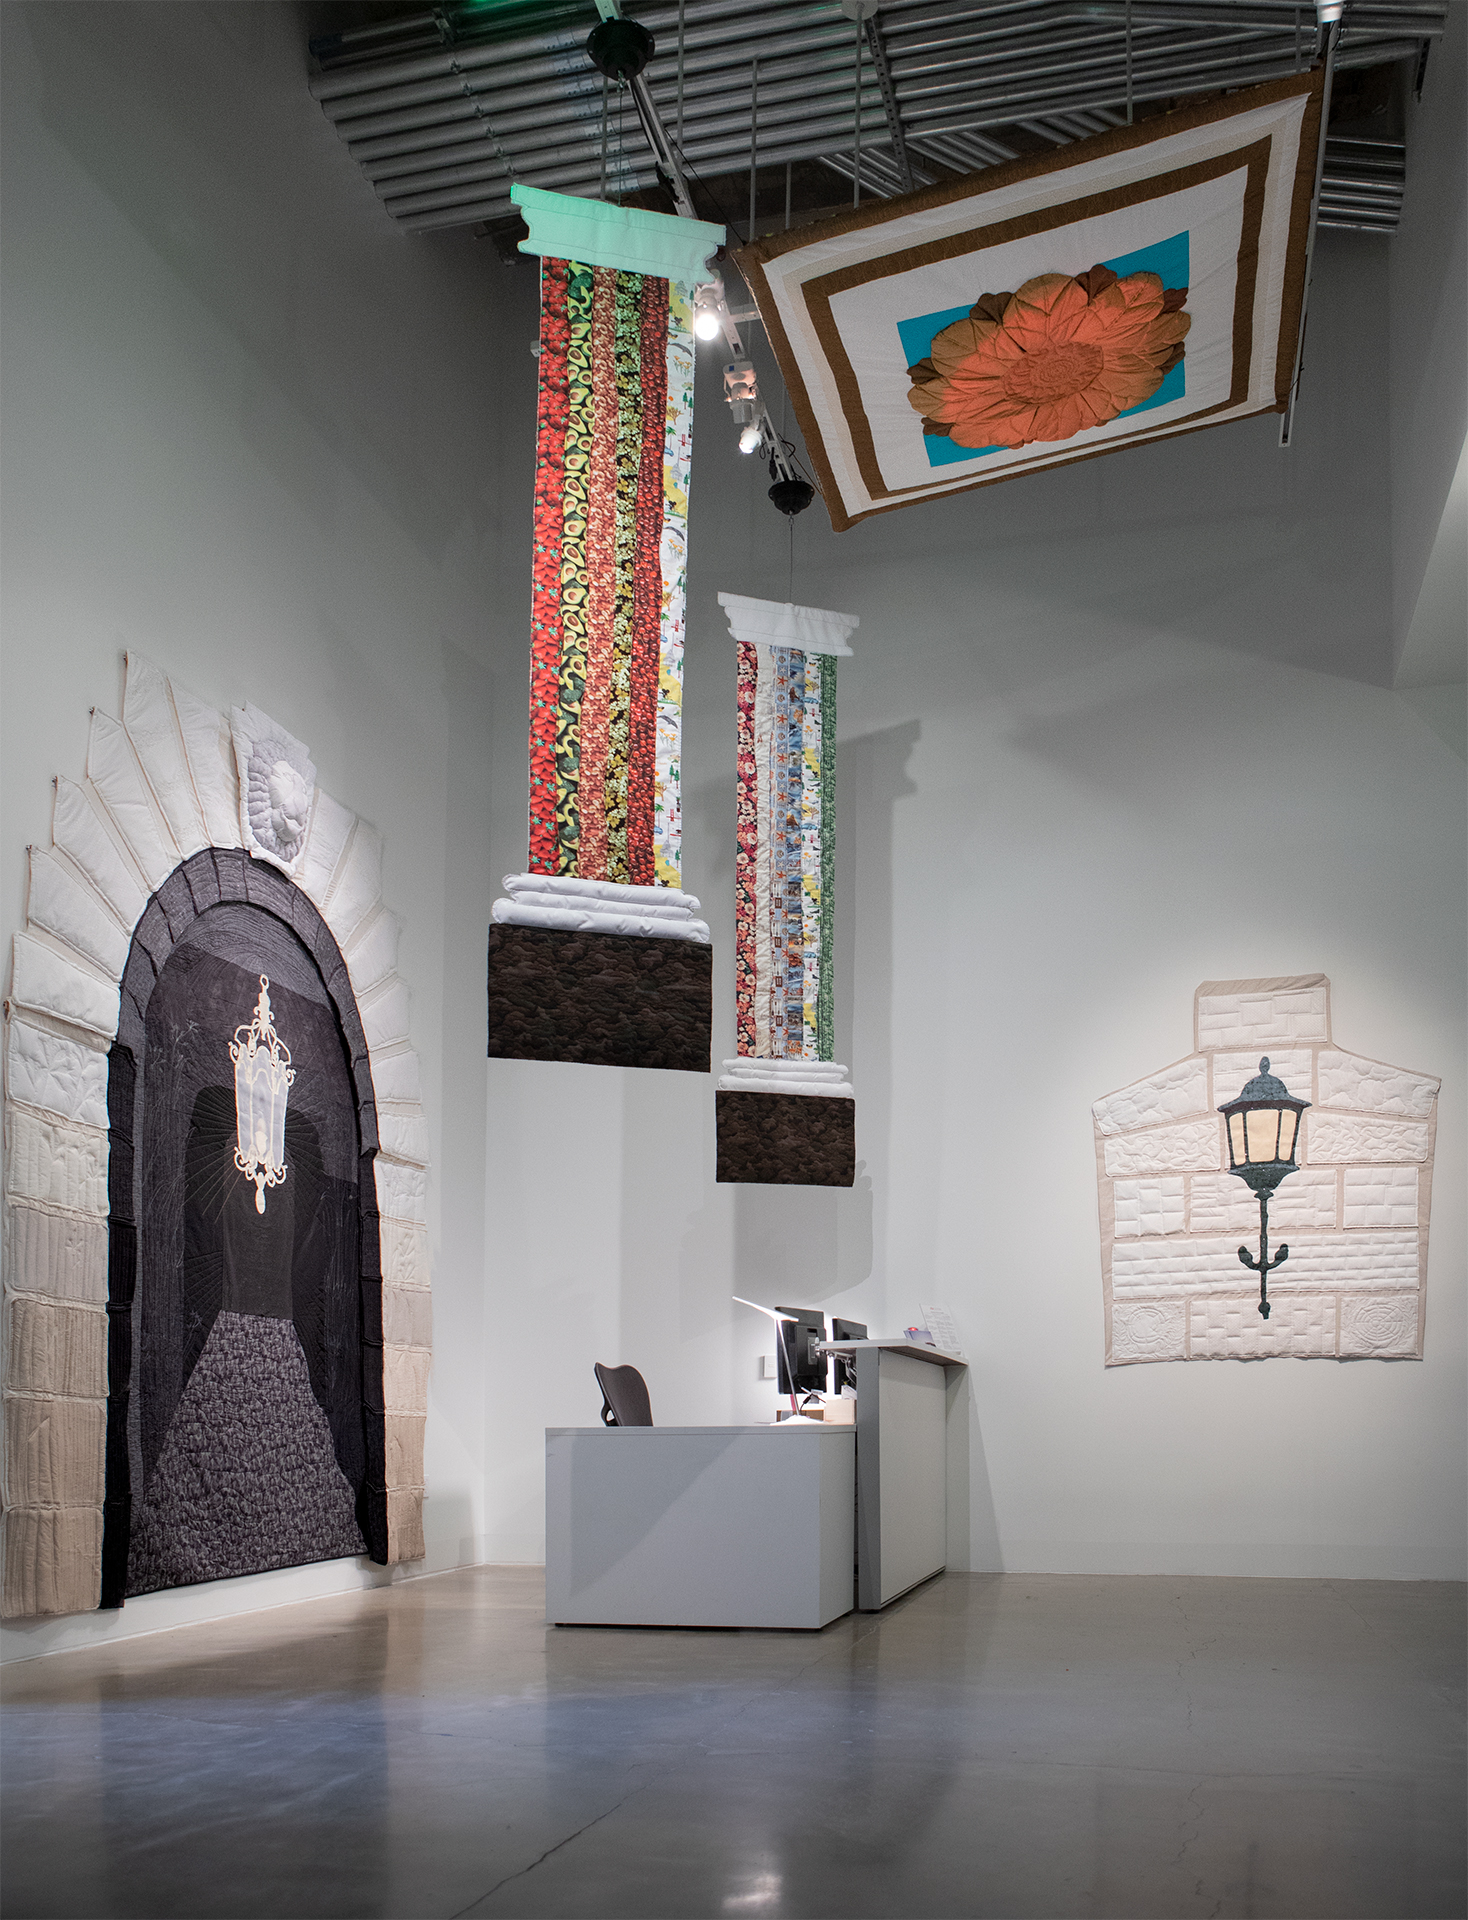 Installation view of Mik Gaspay, May Gaspay and Lleva Abenes' installation 'Fiber Structure,' at the SFAC Gallery.